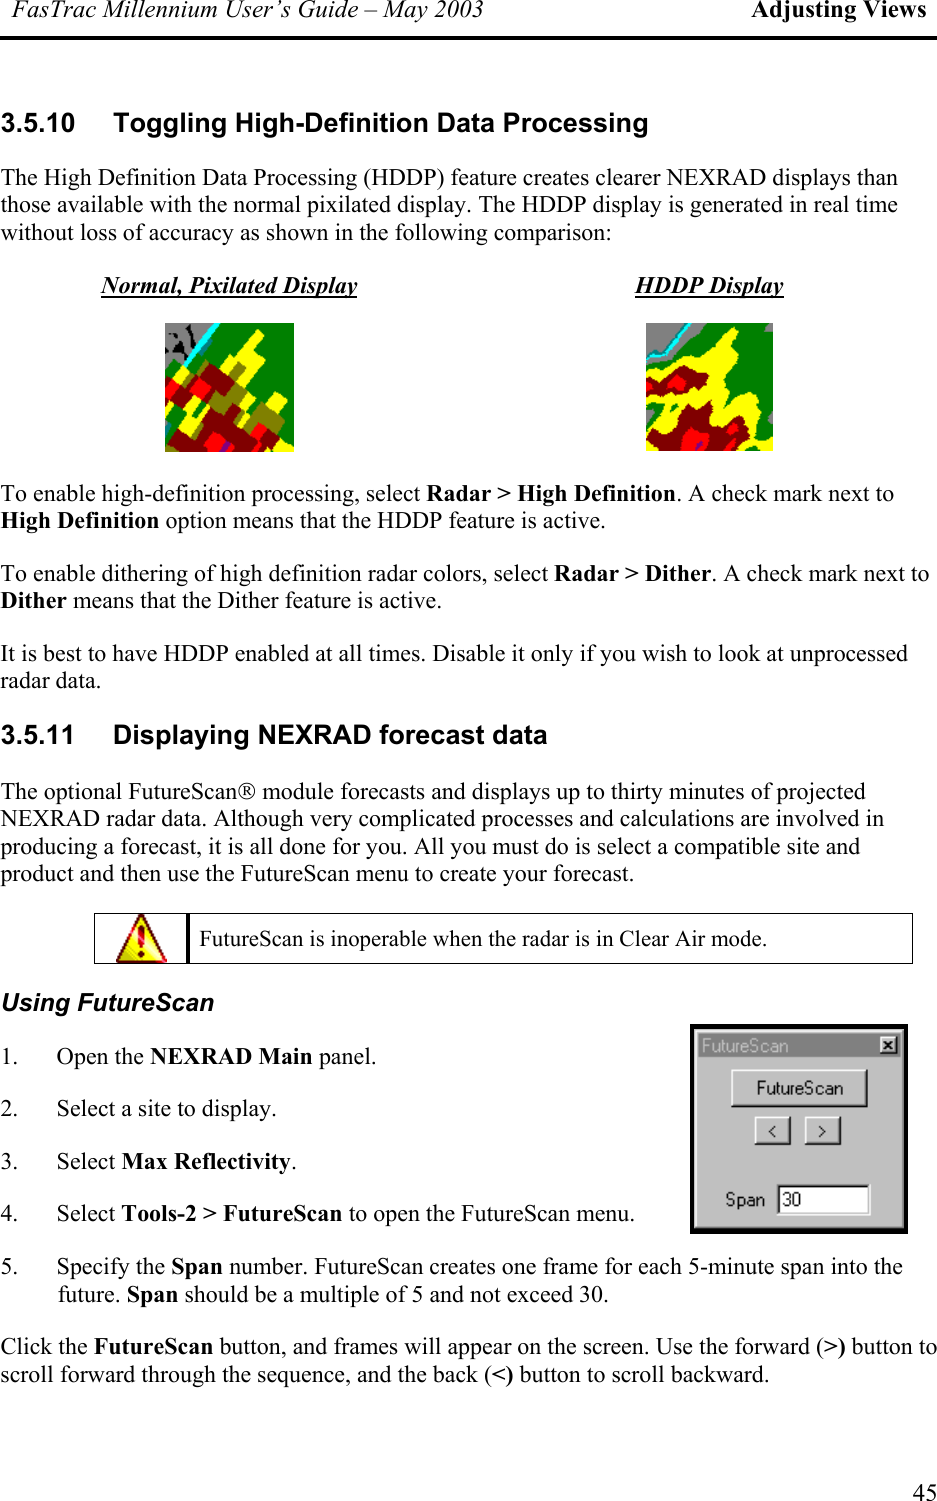 FasTrac Millennium User’s Guide – May 2003 Adjusting Views 3.5.10 Toggling High-Definition Data Processing The High Definition Data Processing (HDDP) feature creates clearer NEXRAD displays than those available with the normal pixilated display. The HDDP display is generated in real time without loss of accuracy as shown in the following comparison: Normal, Pixilated Display HDDP Display    To enable high-definition processing, select Radar &gt; High Definition. A check mark next to High Definition option means that the HDDP feature is active. To enable dithering of high definition radar colors, select Radar &gt; Dither. A check mark next to Dither means that the Dither feature is active. It is best to have HDDP enabled at all times. Disable it only if you wish to look at unprocessed radar data. 3.5.11  Displaying NEXRAD forecast data The optional FutureScan module forecasts and displays up to thirty minutes of projected NEXRAD radar data. Although very complicated processes and calculations are involved in producing a forecast, it is all done for you. All you must do is select a compatible site and product and then use the FutureScan menu to create your forecast.  FutureScan is inoperable when the radar is in Clear Air mode. Using FutureScan 1. Open the NEXRAD Main panel. 2.  Select a site to display.  3. Select Max Reflectivity. 4. Select Tools-2 &gt; FutureScan to open the FutureScan menu. 5. Specify the Span number. FutureScan creates one frame for each 5-minute span into the future. Span should be a multiple of 5 and not exceed 30. Click the FutureScan button, and frames will appear on the screen. Use the forward (&gt;) button to scroll forward through the sequence, and the back (&lt;) button to scroll backward. 45 